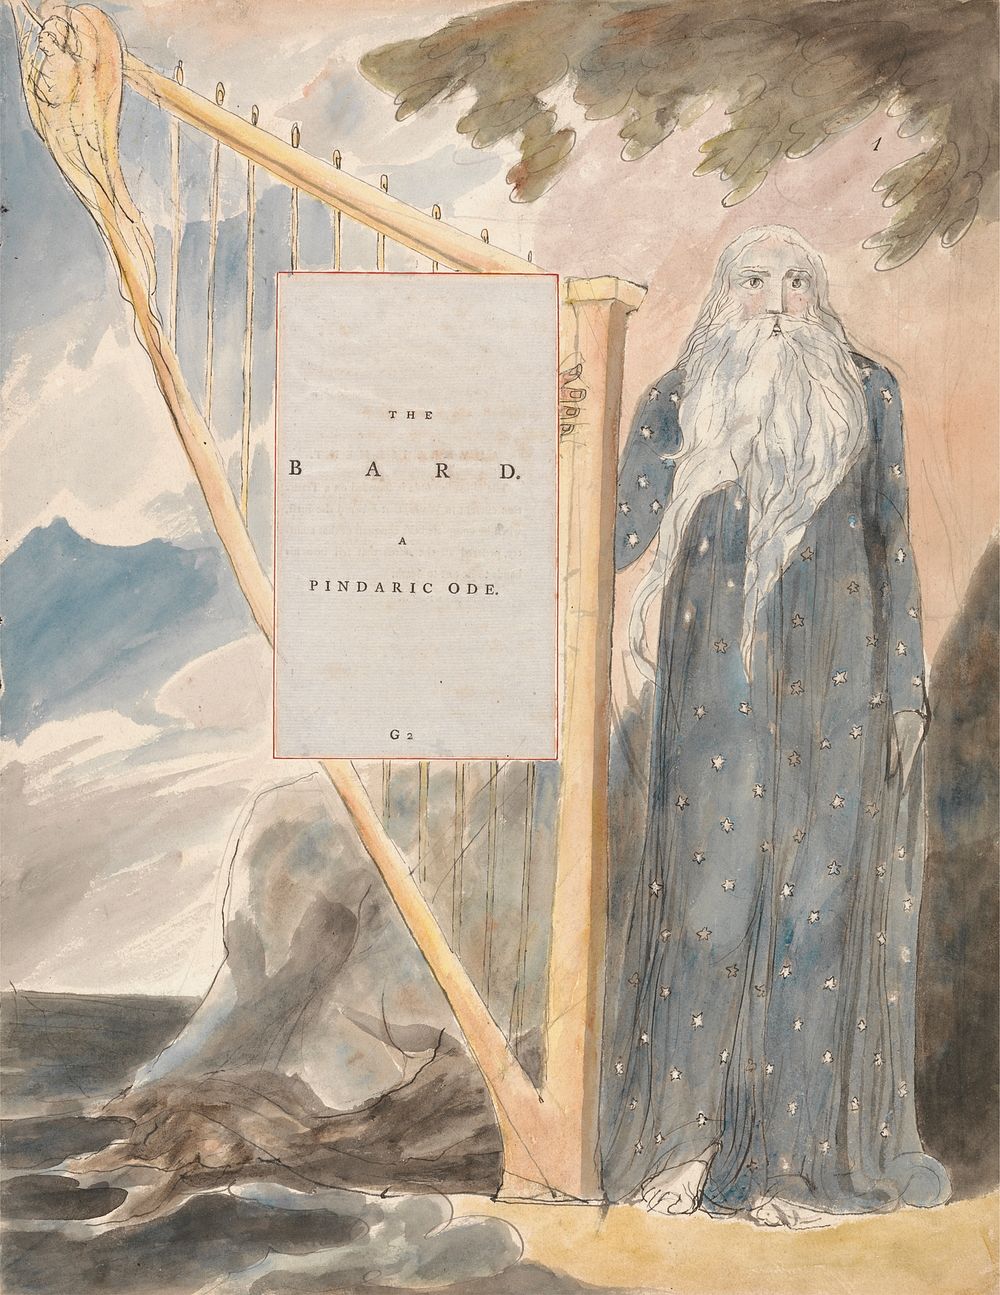 The Poems of Thomas Gray, Design 53, "The Bard." by William Blake. Original public domain image from Yale Center for British…